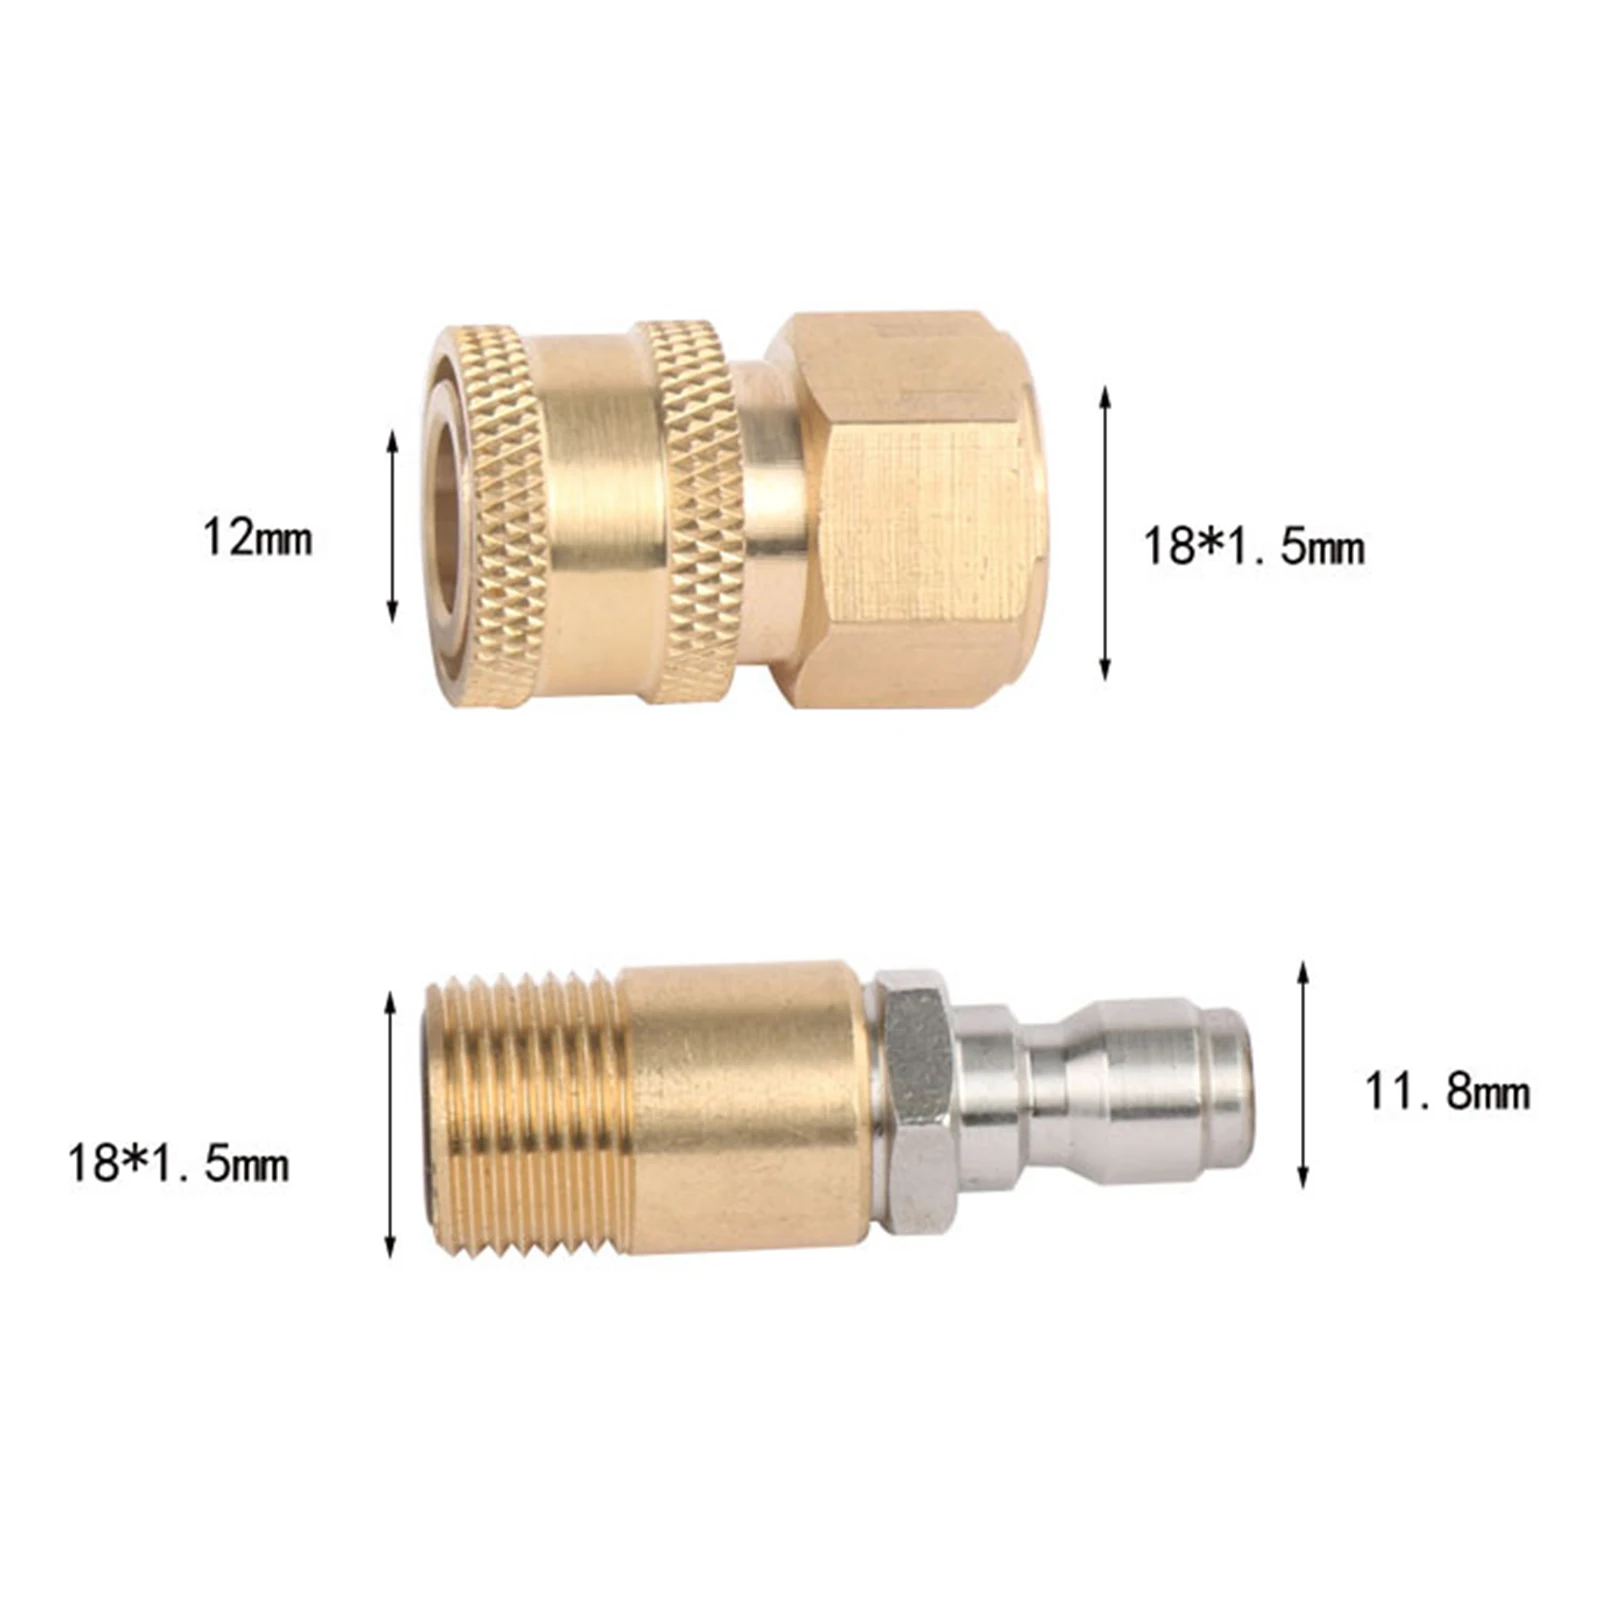 M18 Pressure Washer Adapter Set Quick Disconnect Kit Quick Connect Quick Release Water Hose Fitting 1/4" M18x1.5